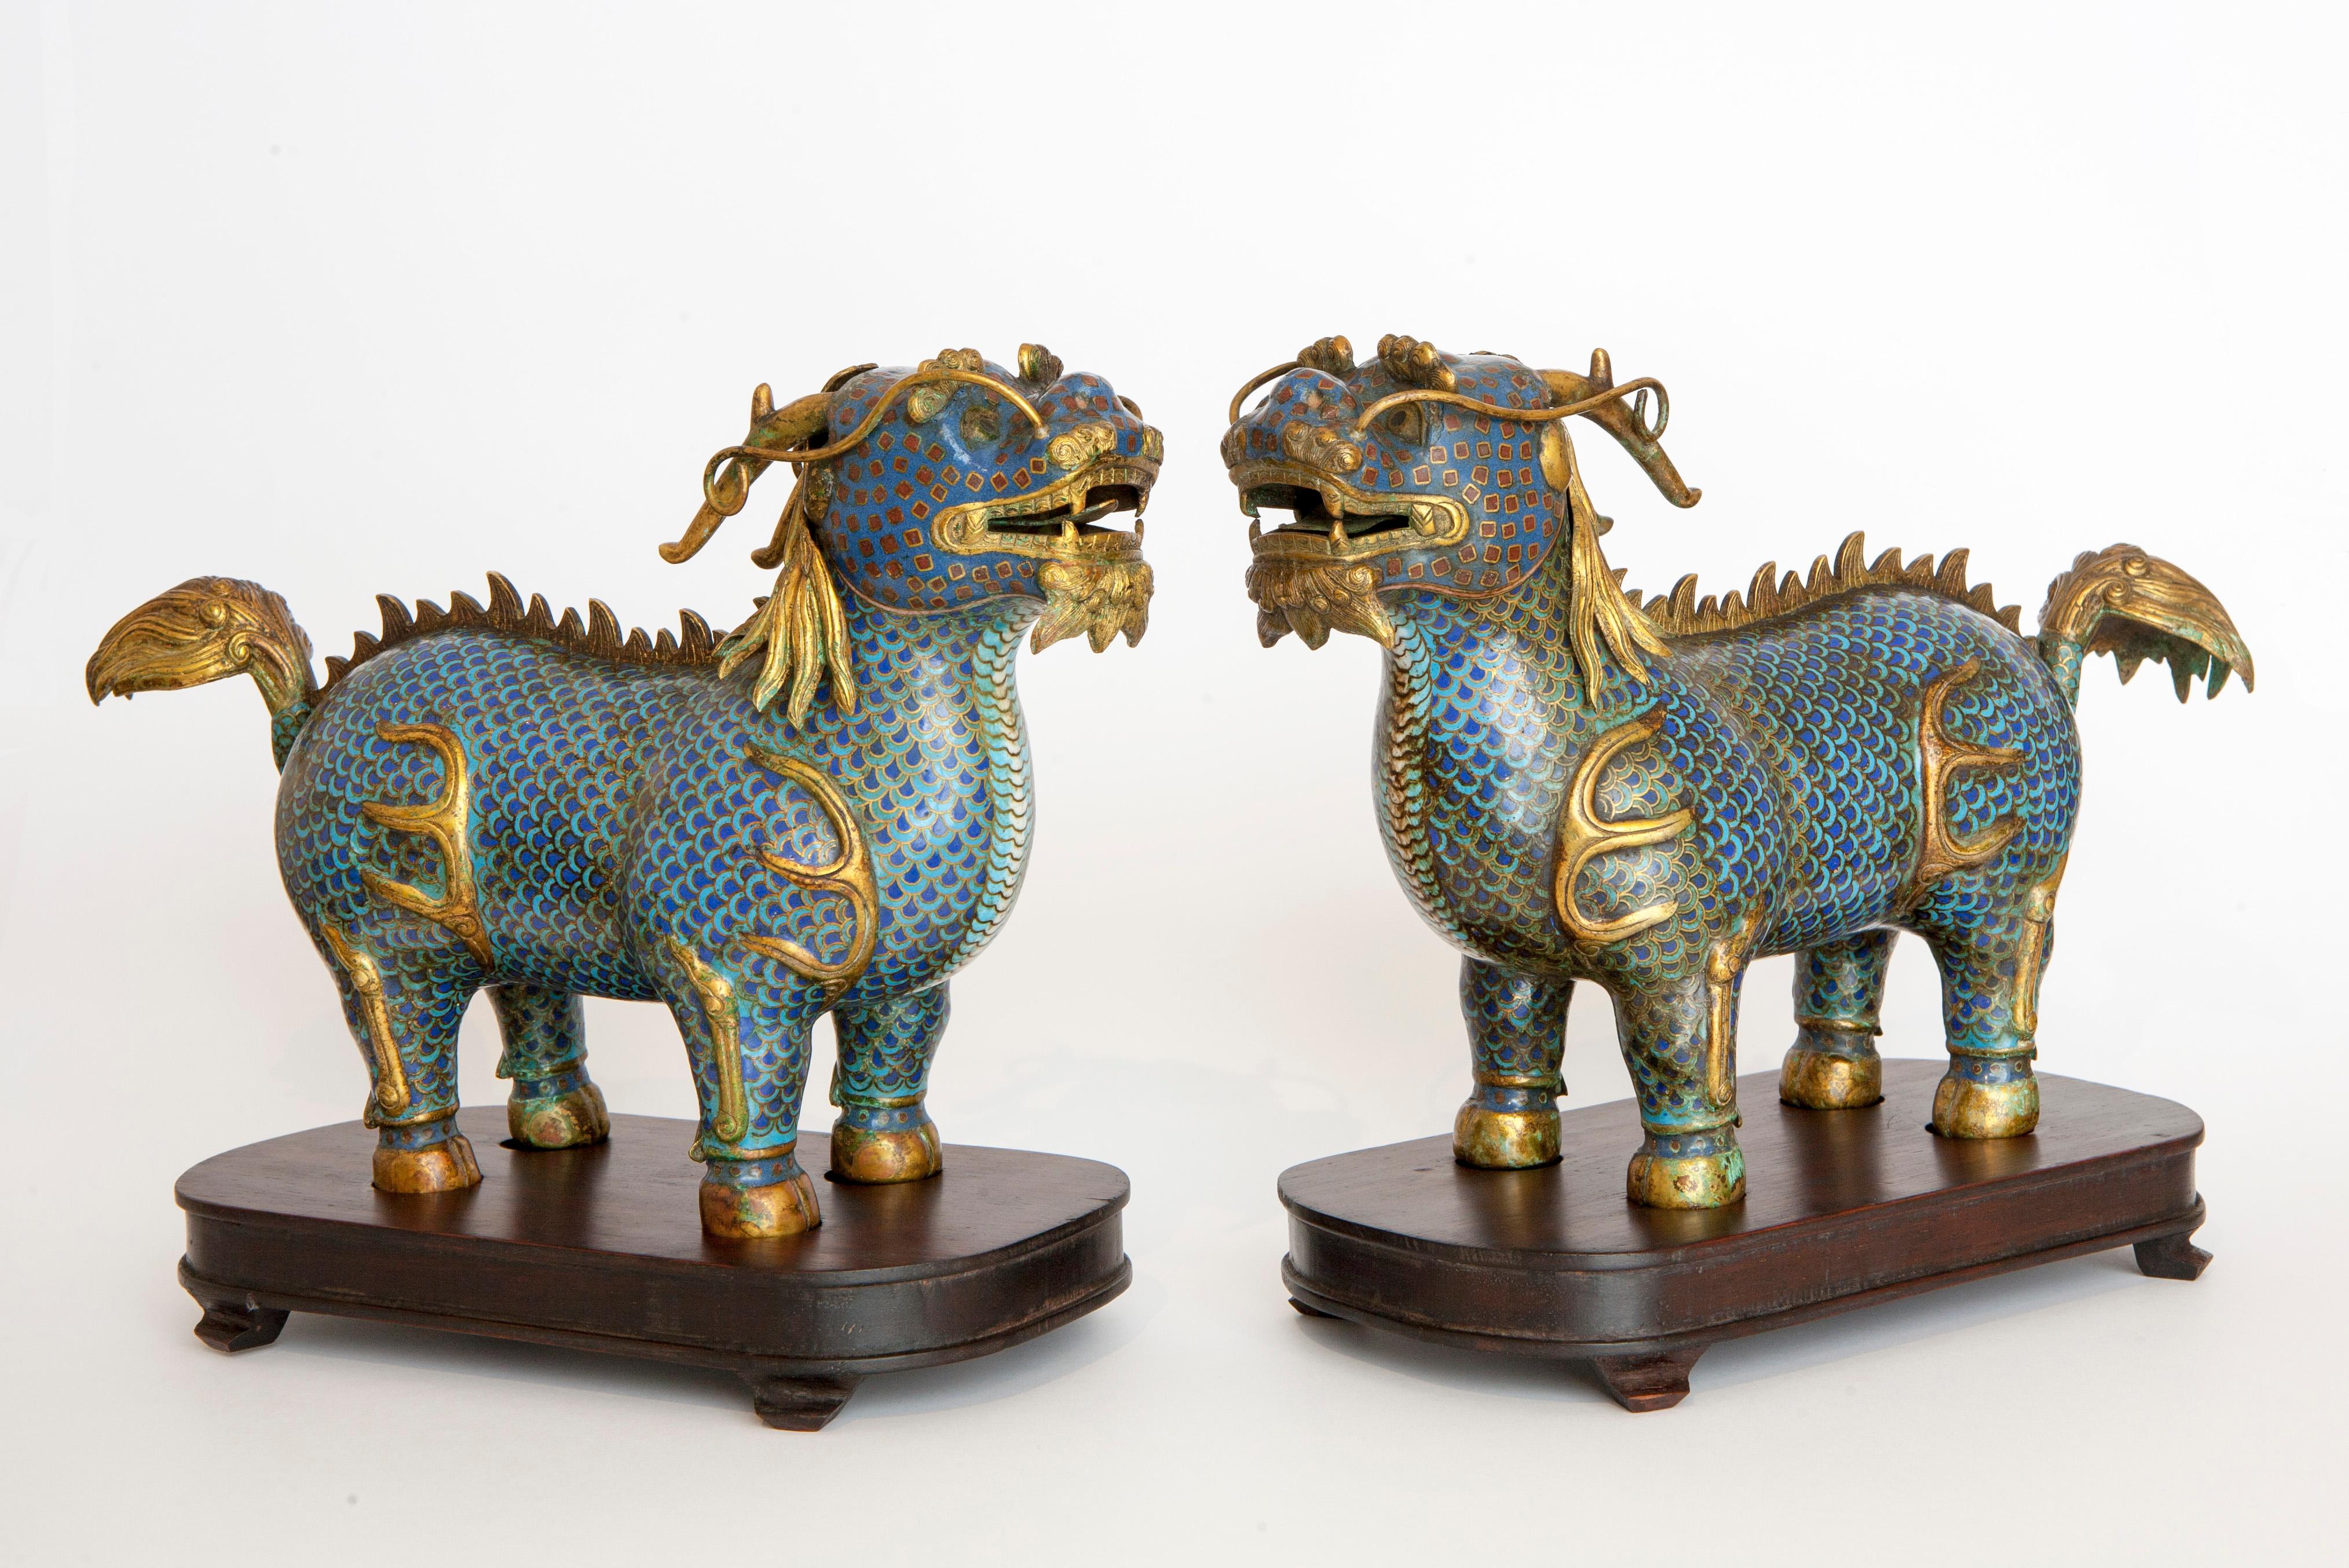 Pair of Qilin in cloisonné resting on wooden bases - Art by Unknown